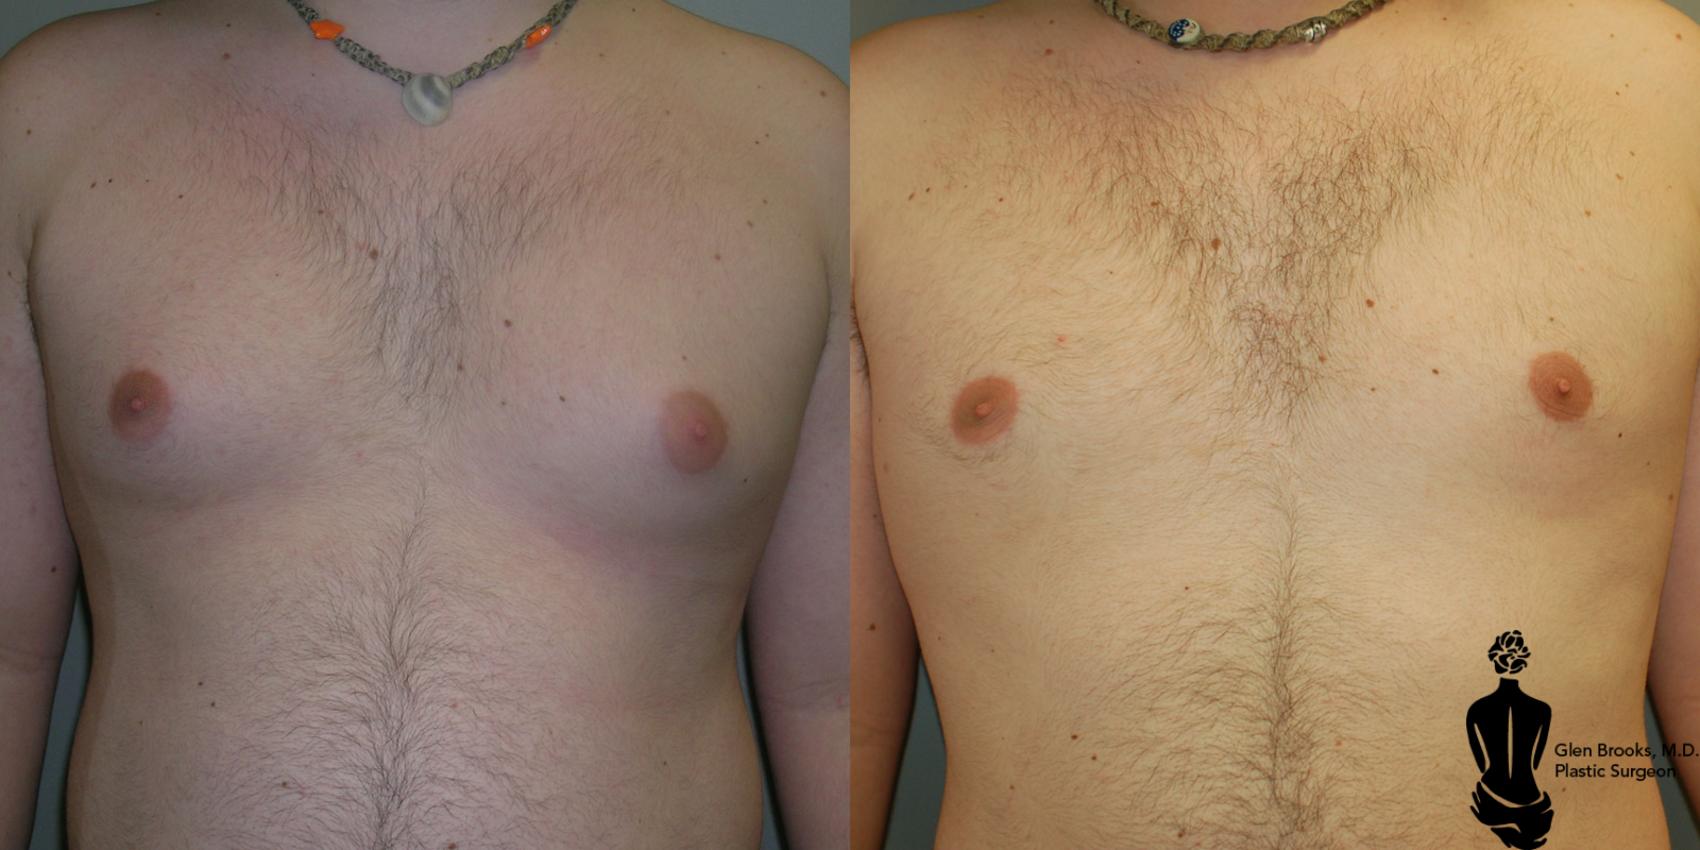 Gynecomastia Before & After Photo | Springfield, MA | Aesthetic Plastic & Reconstructive Surgery